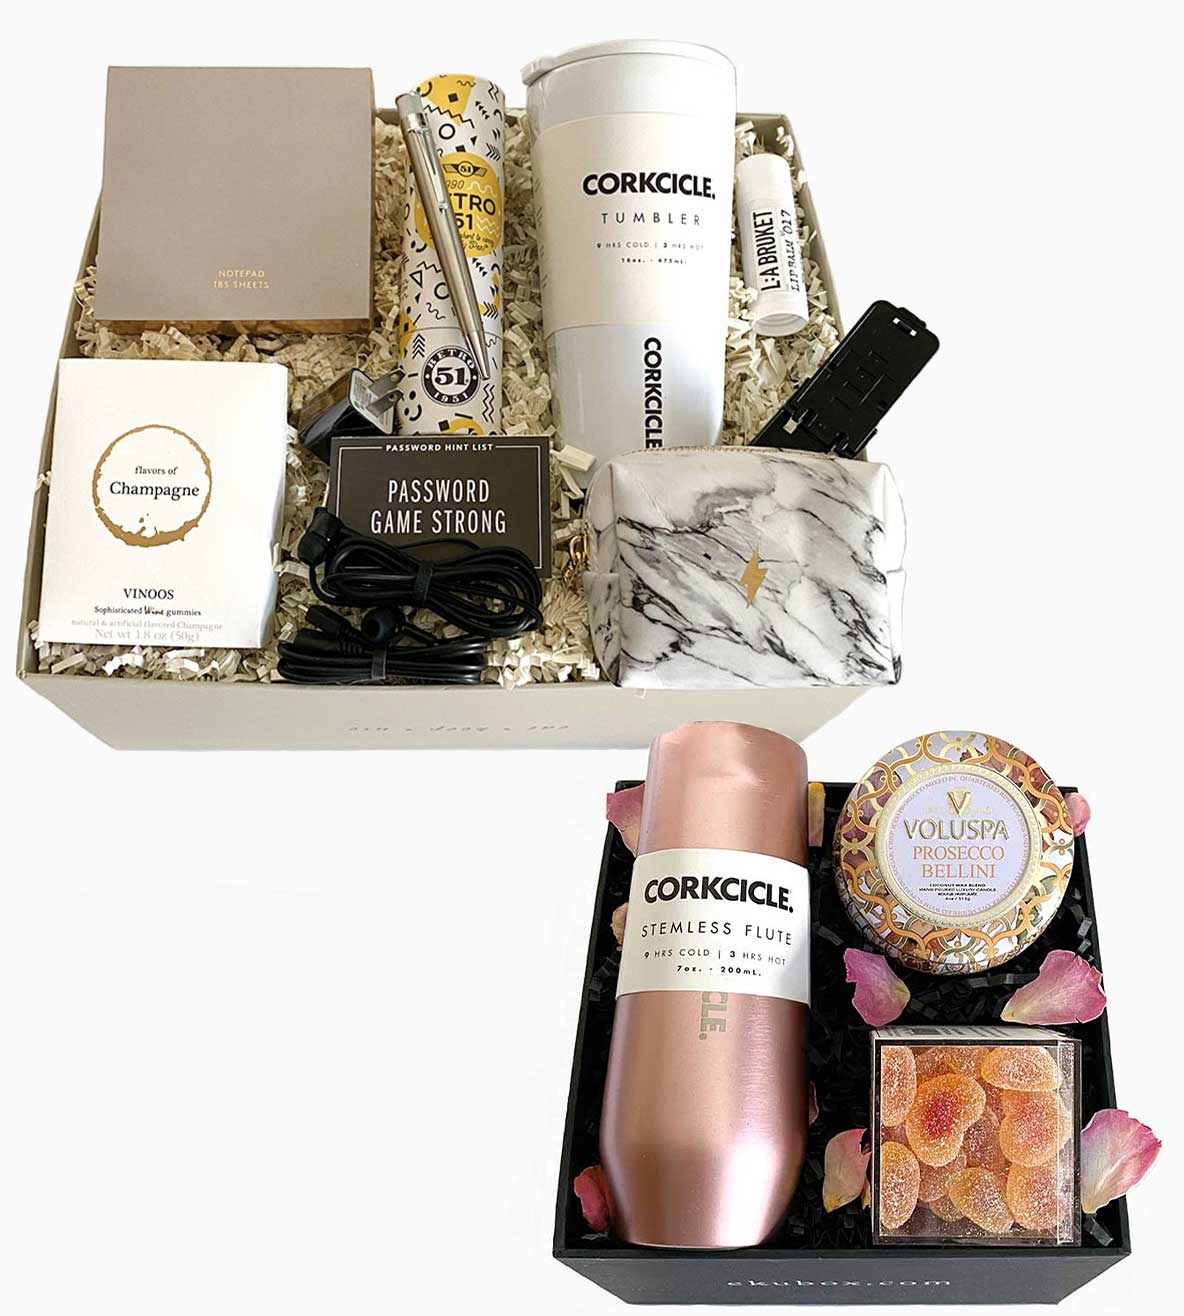 Shop ready-to-ship gift boxes featuring Corkcicle products. Shop our Whiteout Gift Box and our best selling Bellini Box.